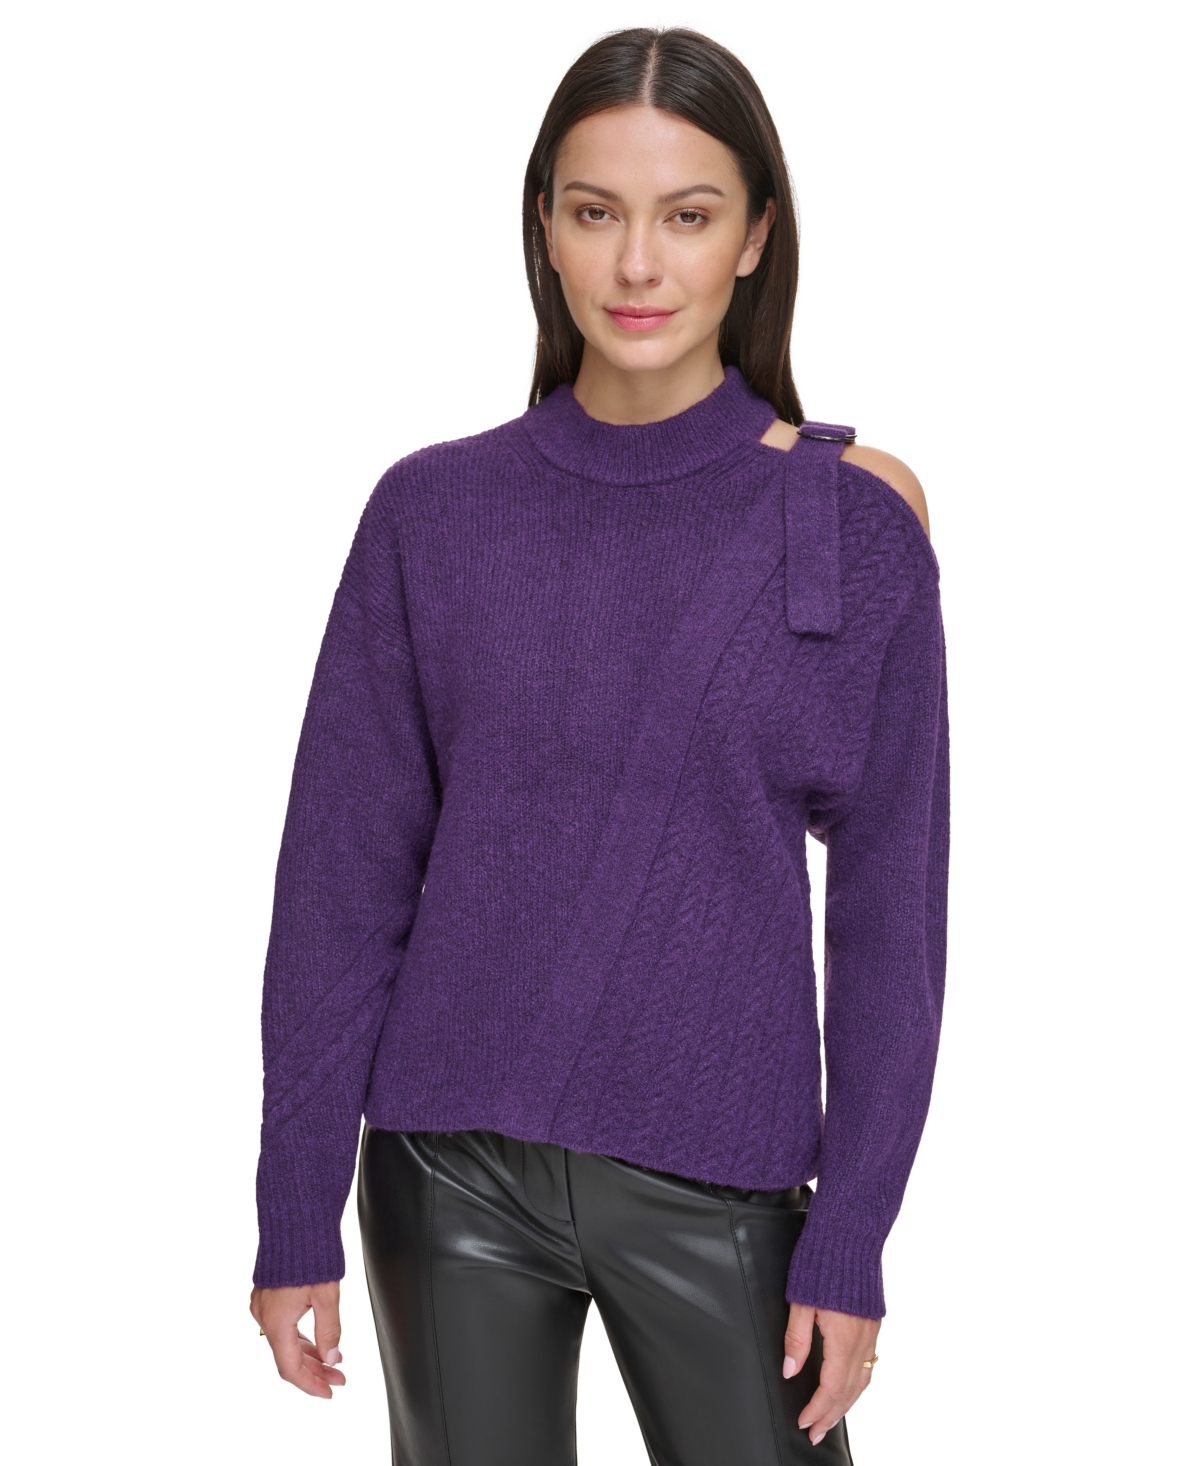 DKNY WOMEN'S MIXED-STITCH COLD-SHOULDER SWEATER